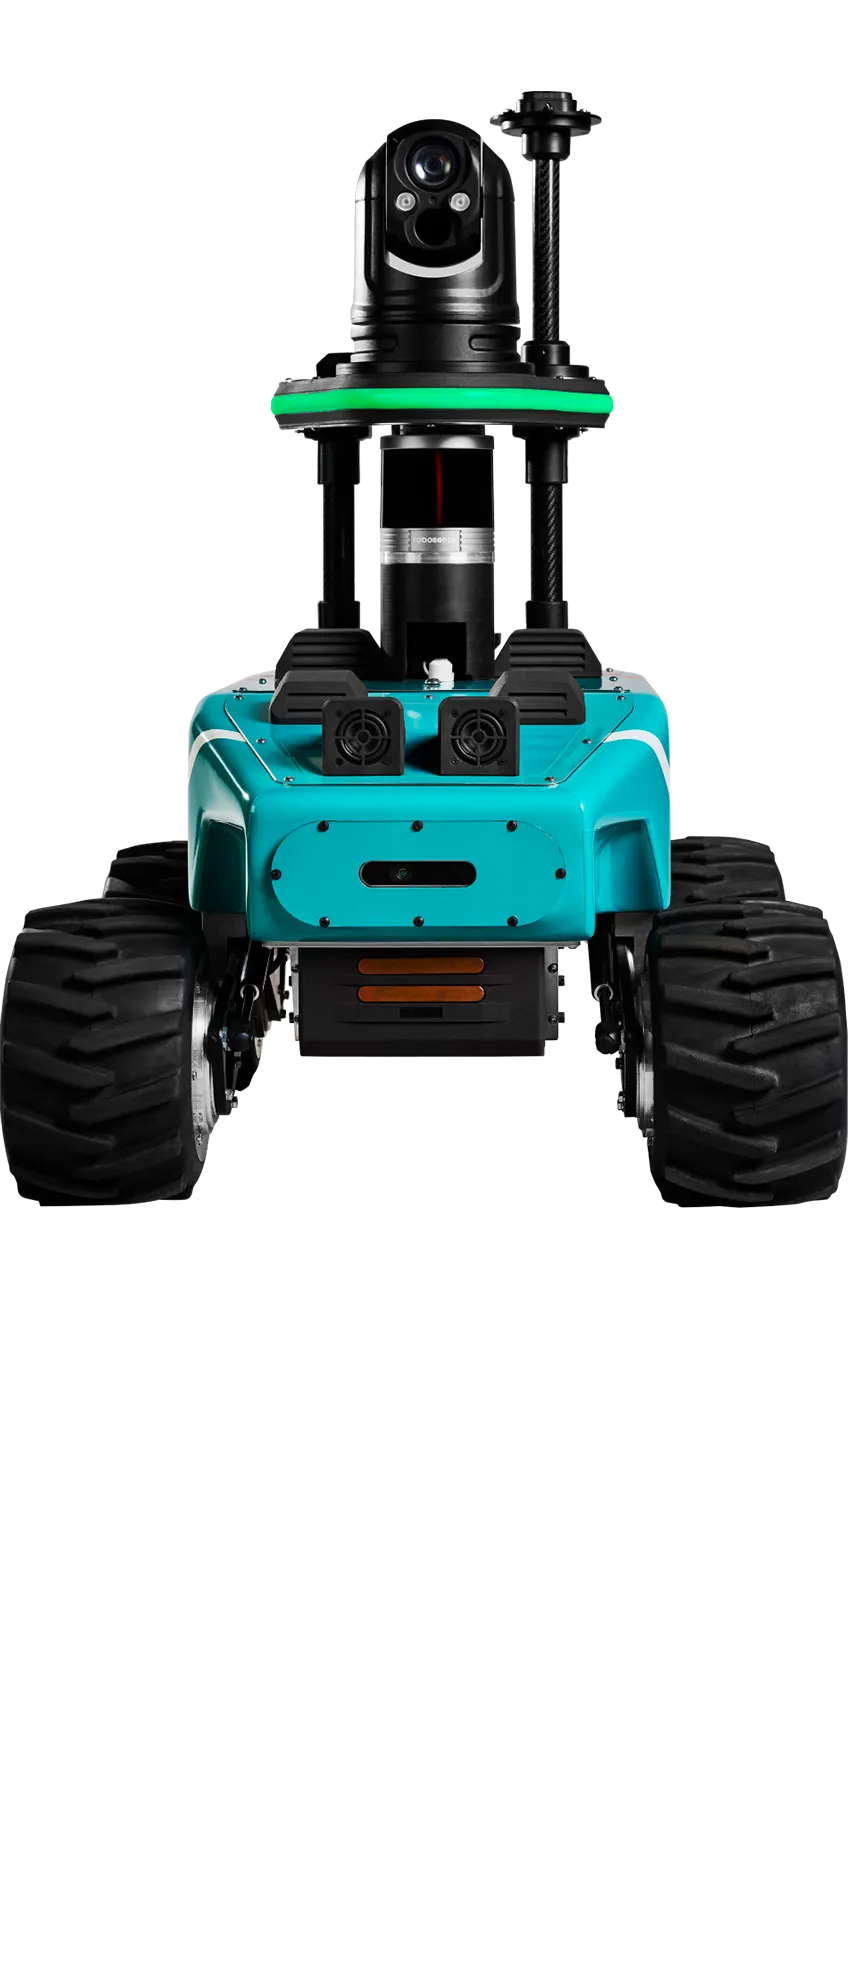 RBWatcher robot - Front side